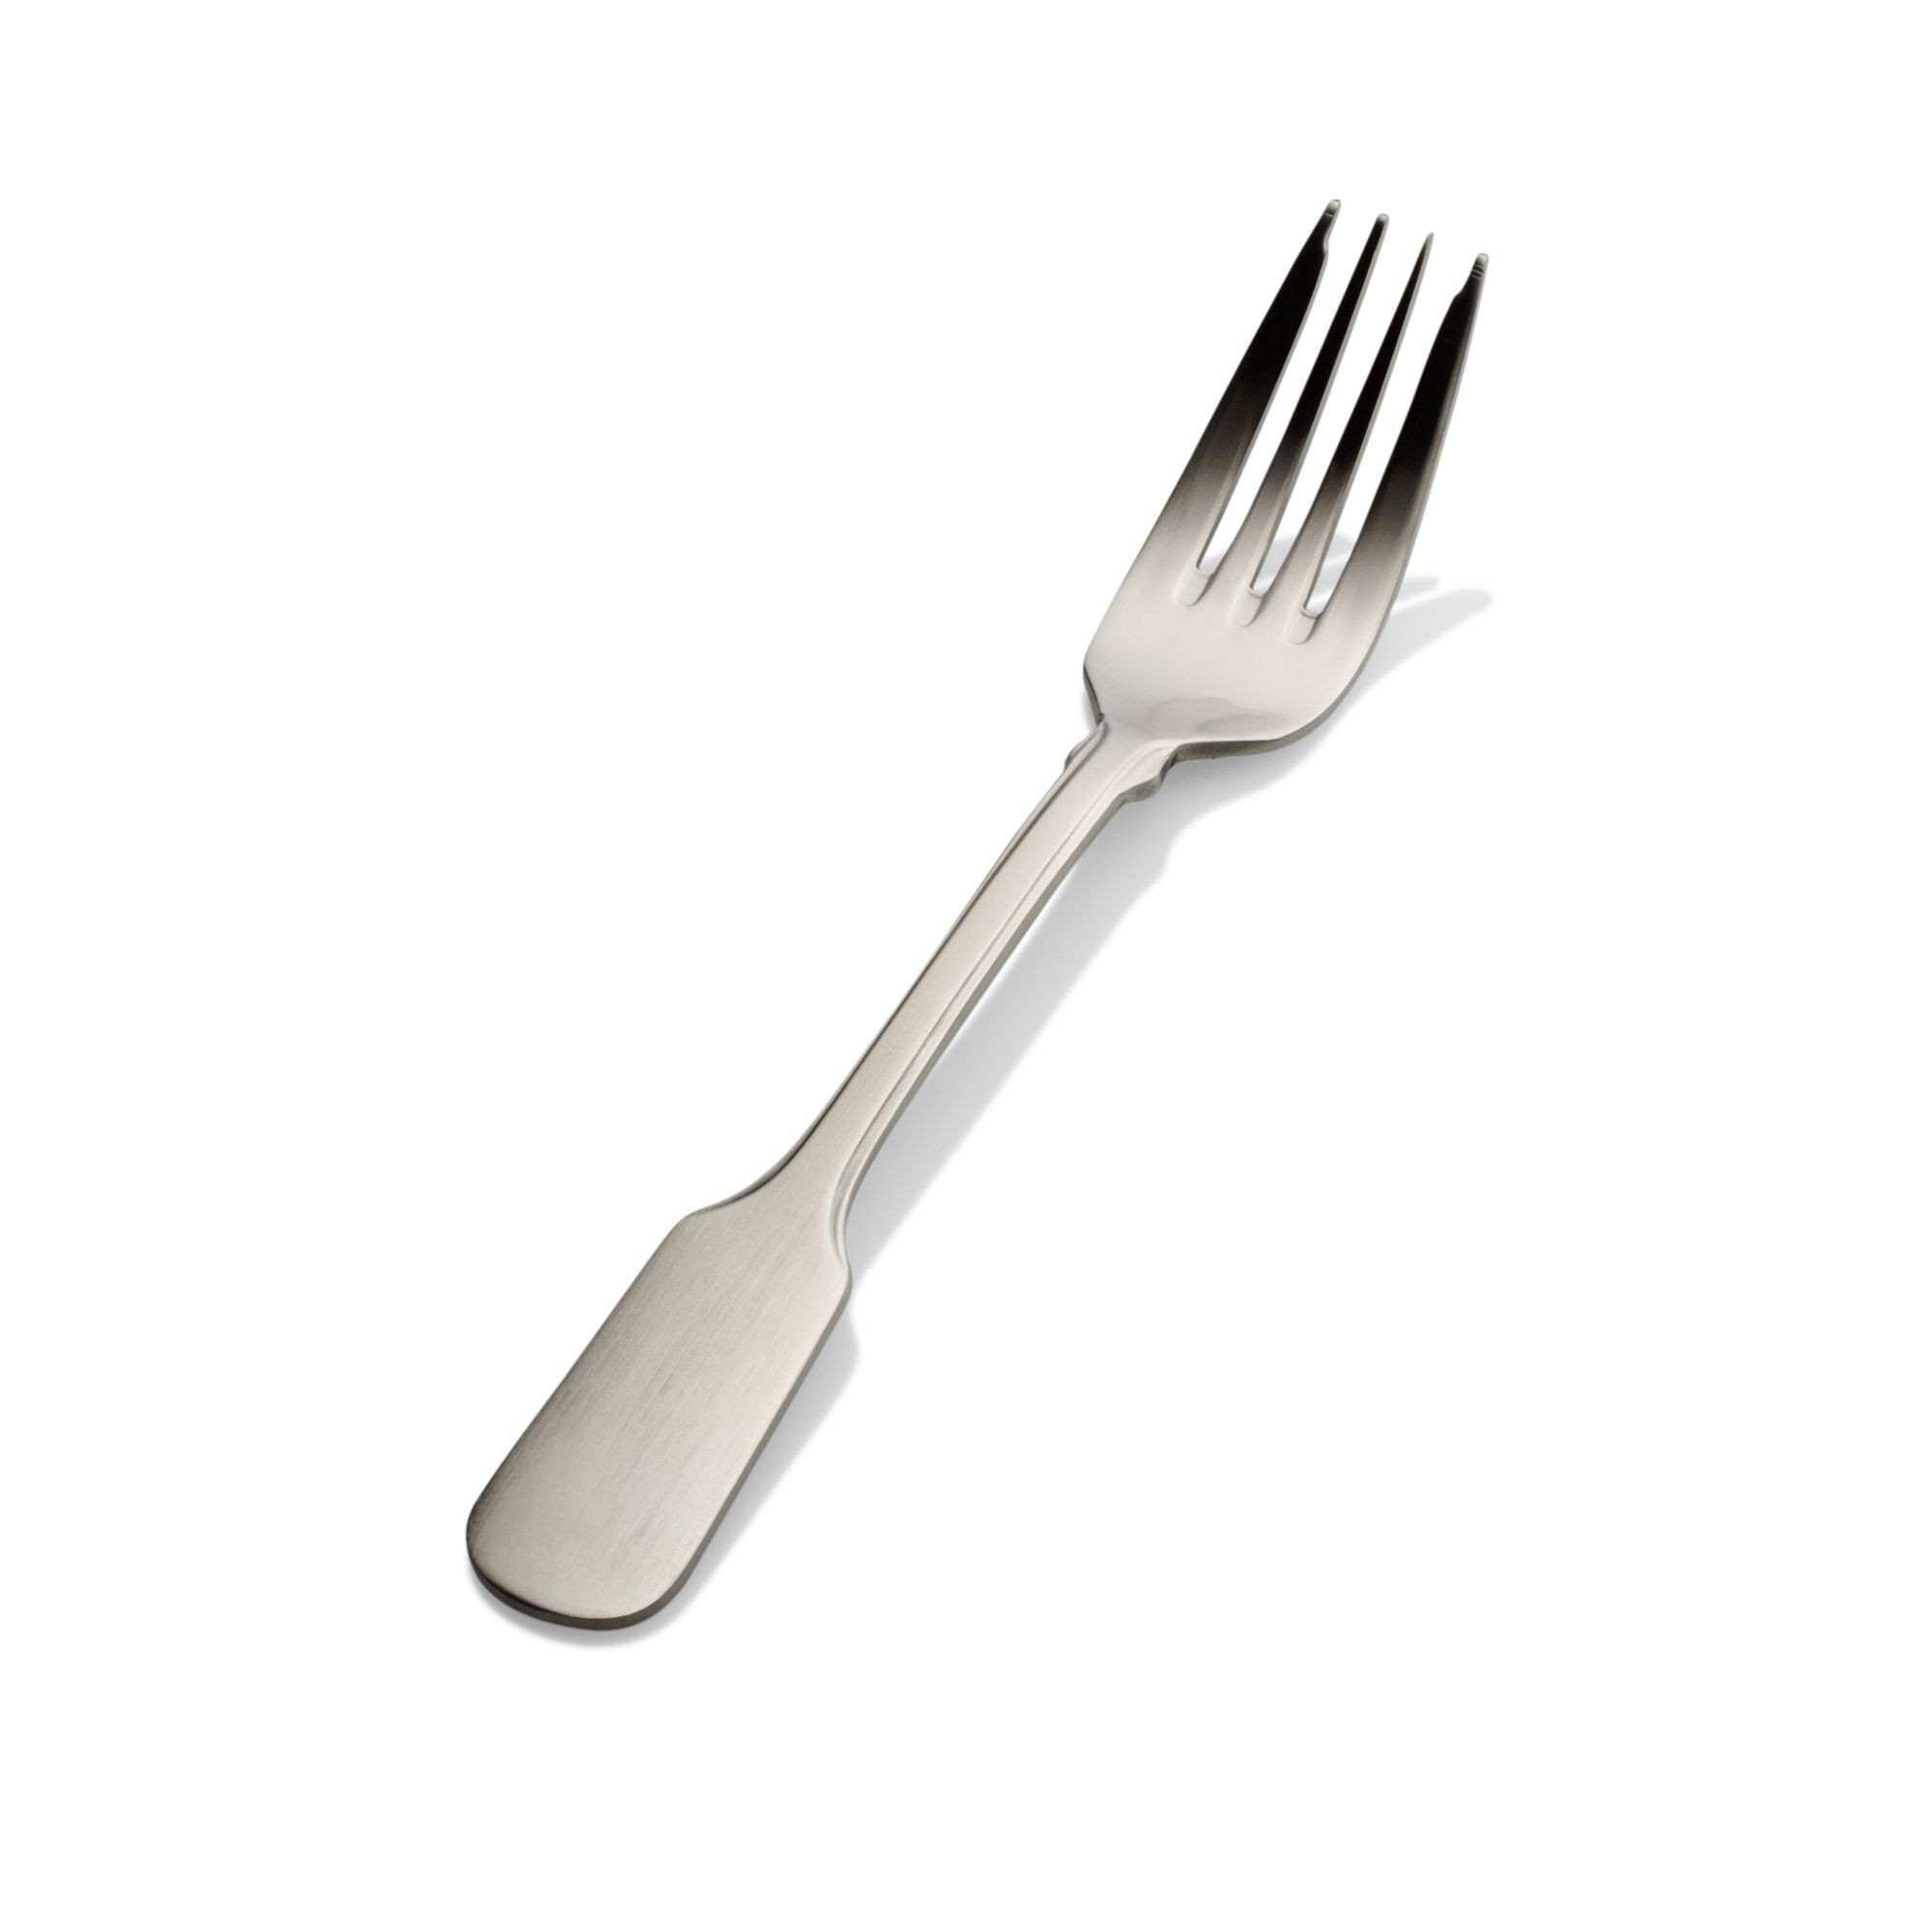 Bon Chef S1907S Liberty 18/8 Stainless Steel Silverplated Salad and Dessert Fork